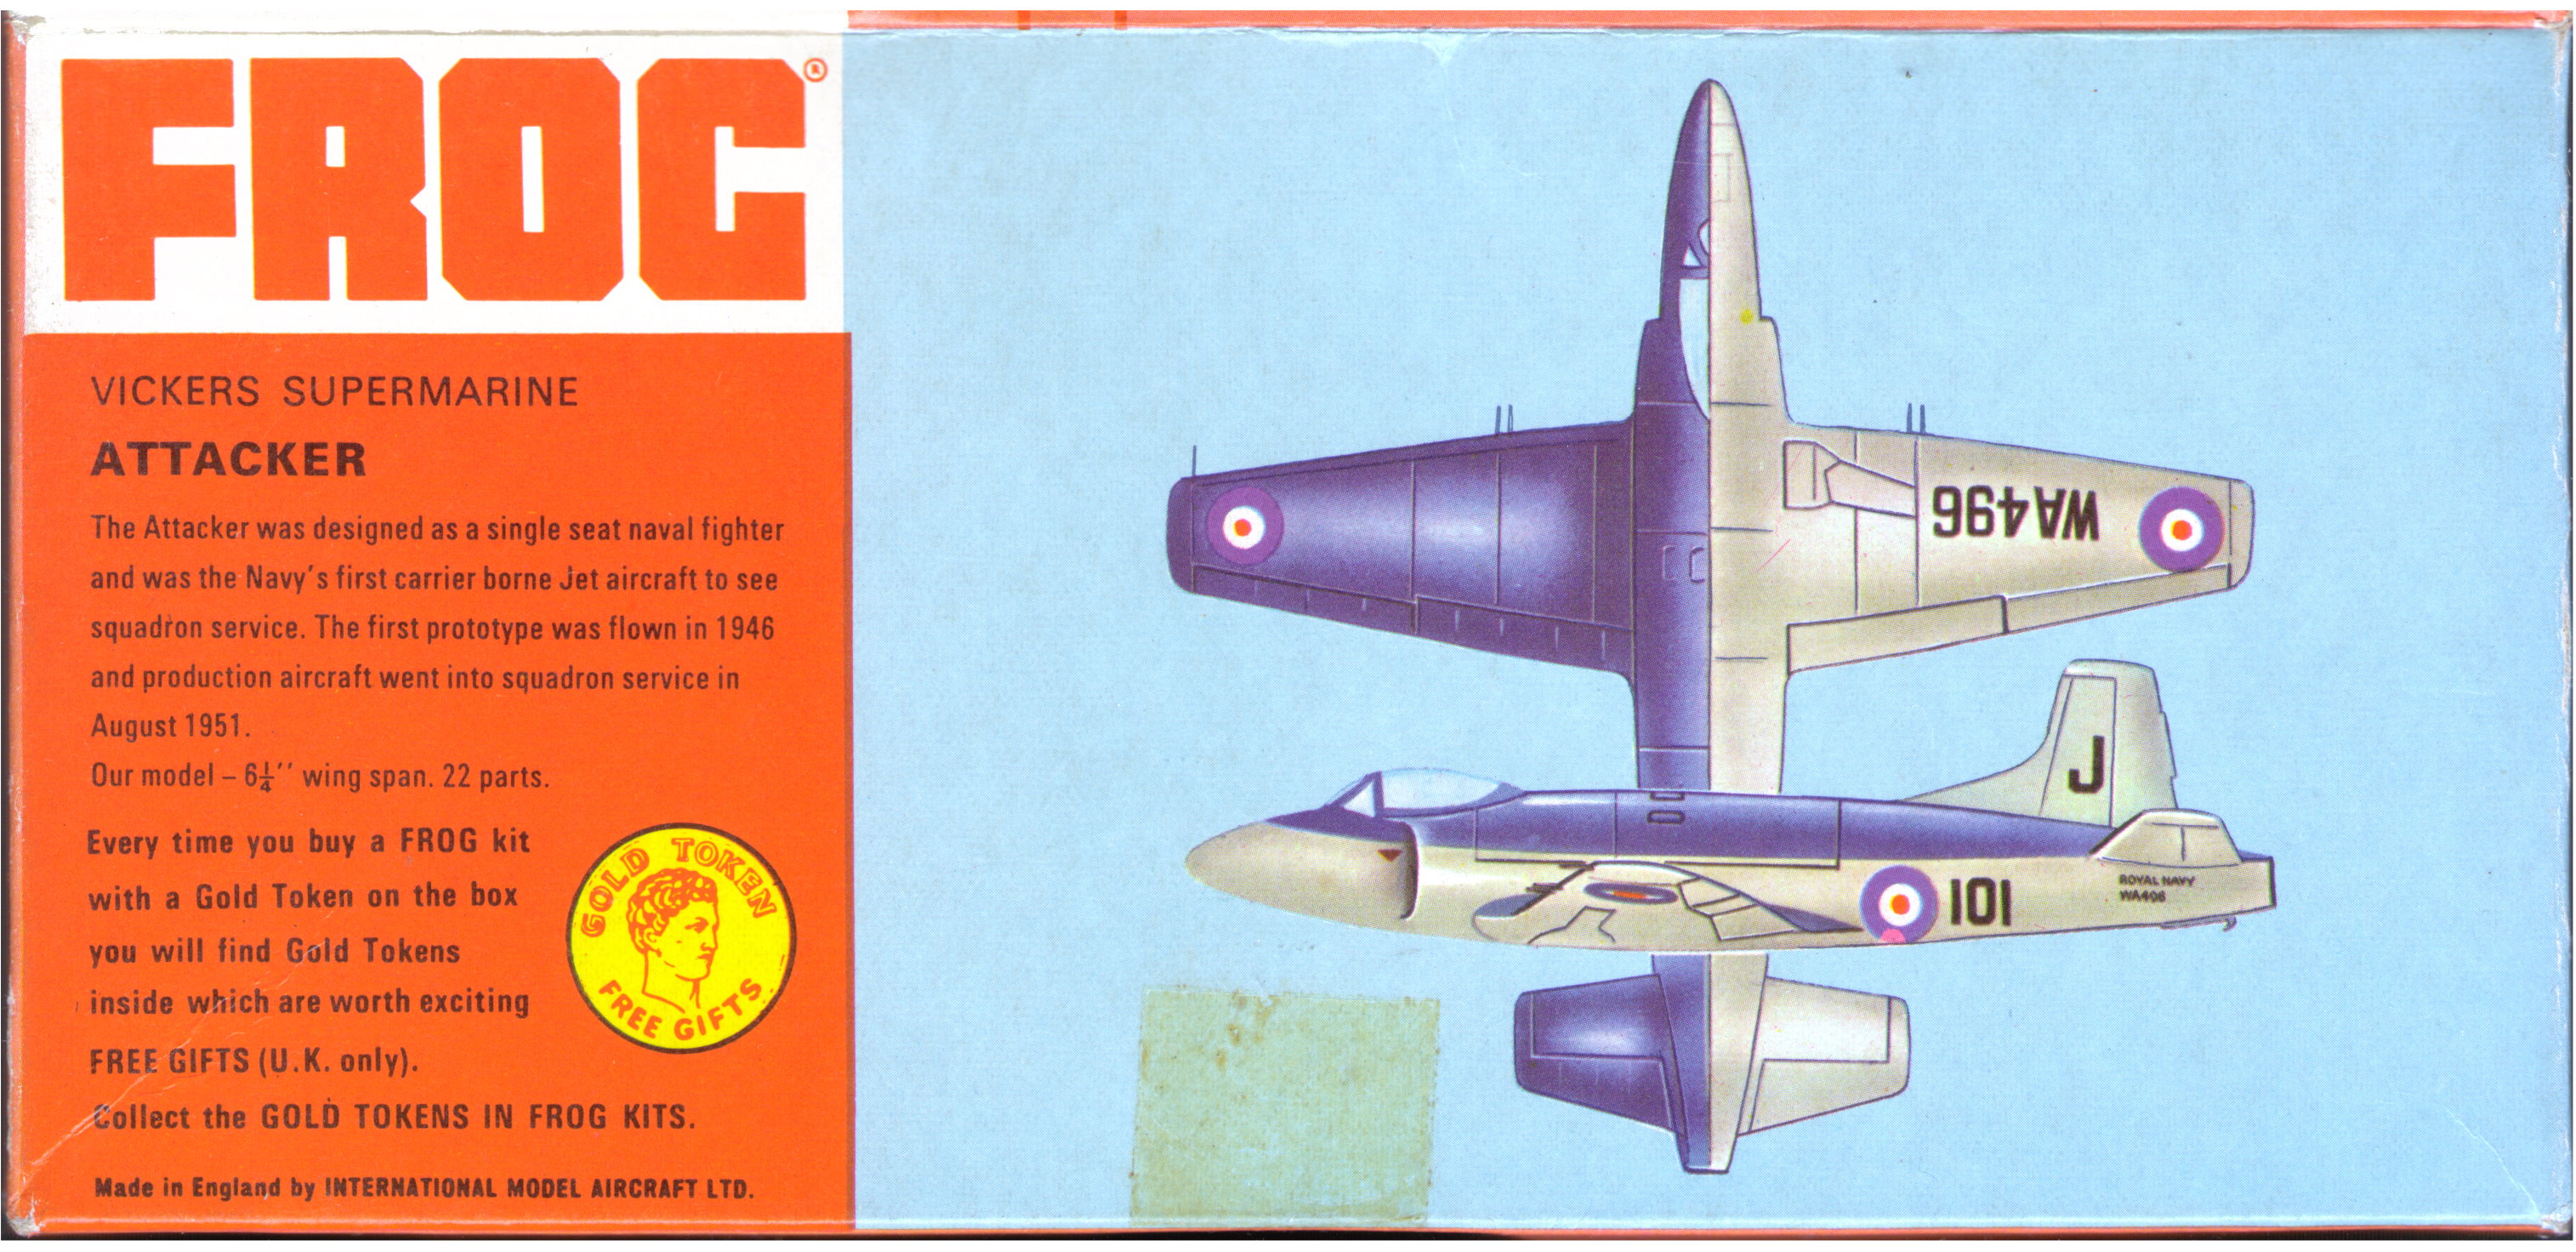 FROG F330 Vickers-Supermarine Attacker, IMA ltd, 1964, Colour painting guide on base of box